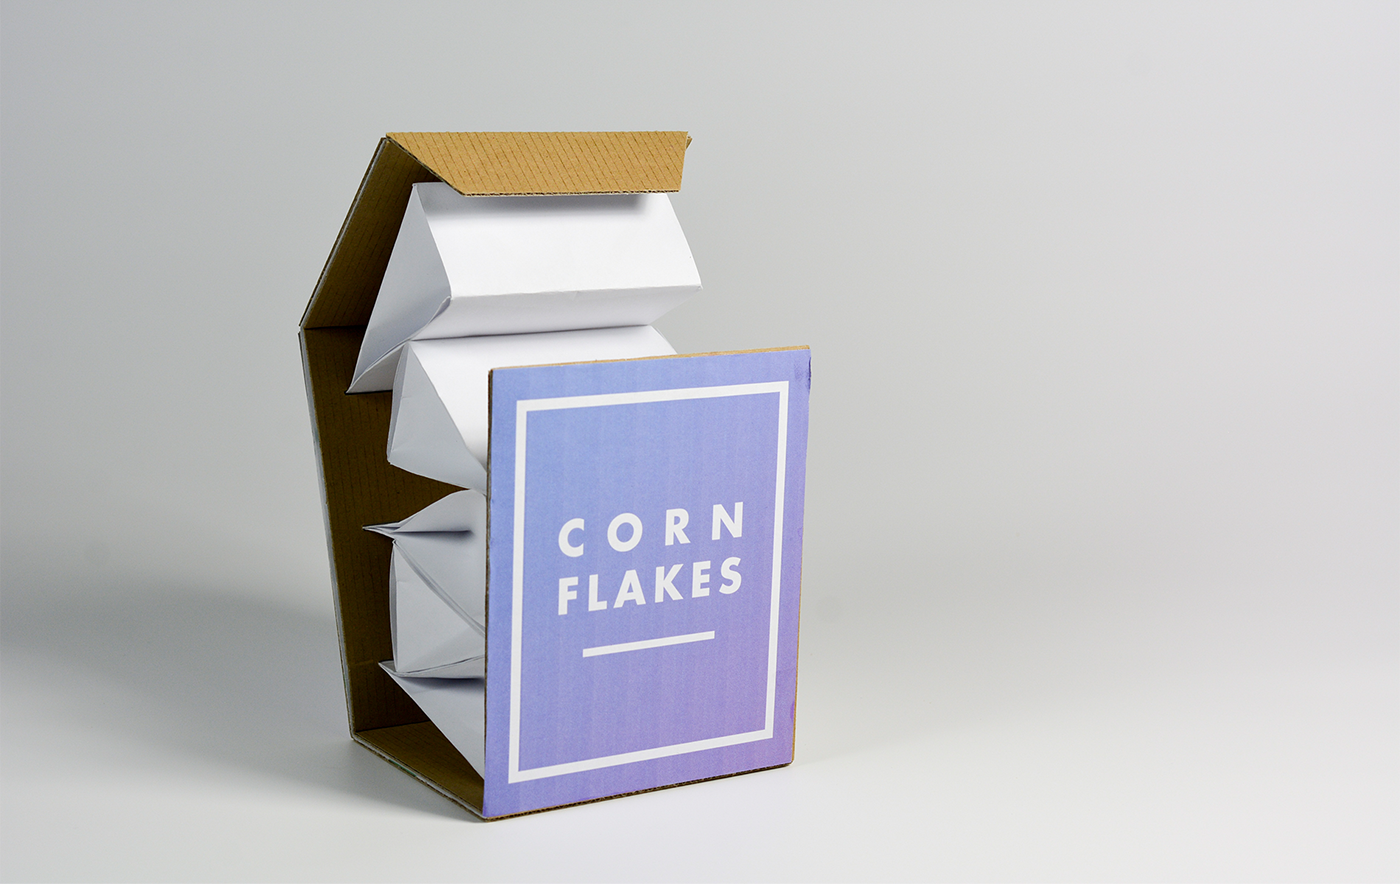 Food waste redesign Cornflakes package waste ecologic solution ecologic prevent food waste cardboard cardboard packaging howestipo idc industrial product design howest